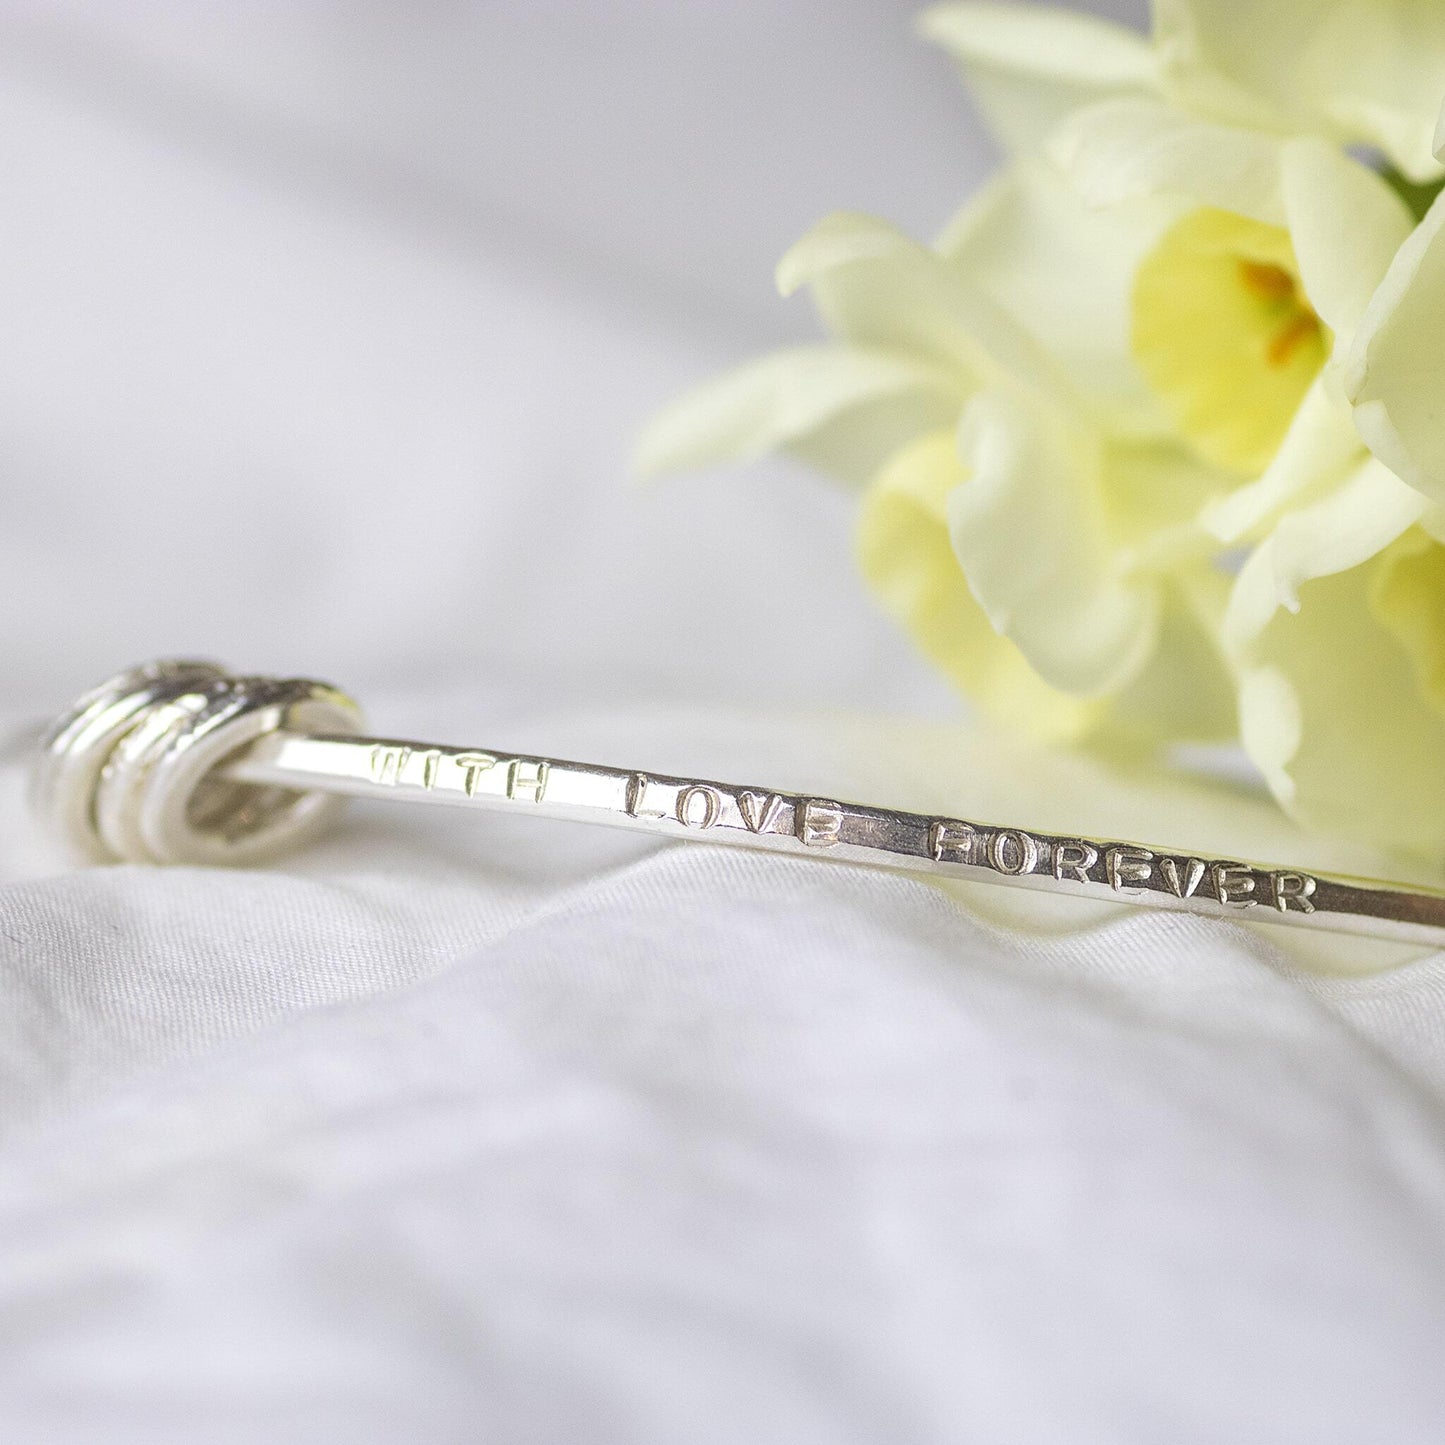 Personalised Silver Links Bangle - 5 Links for 5 Loved Ones